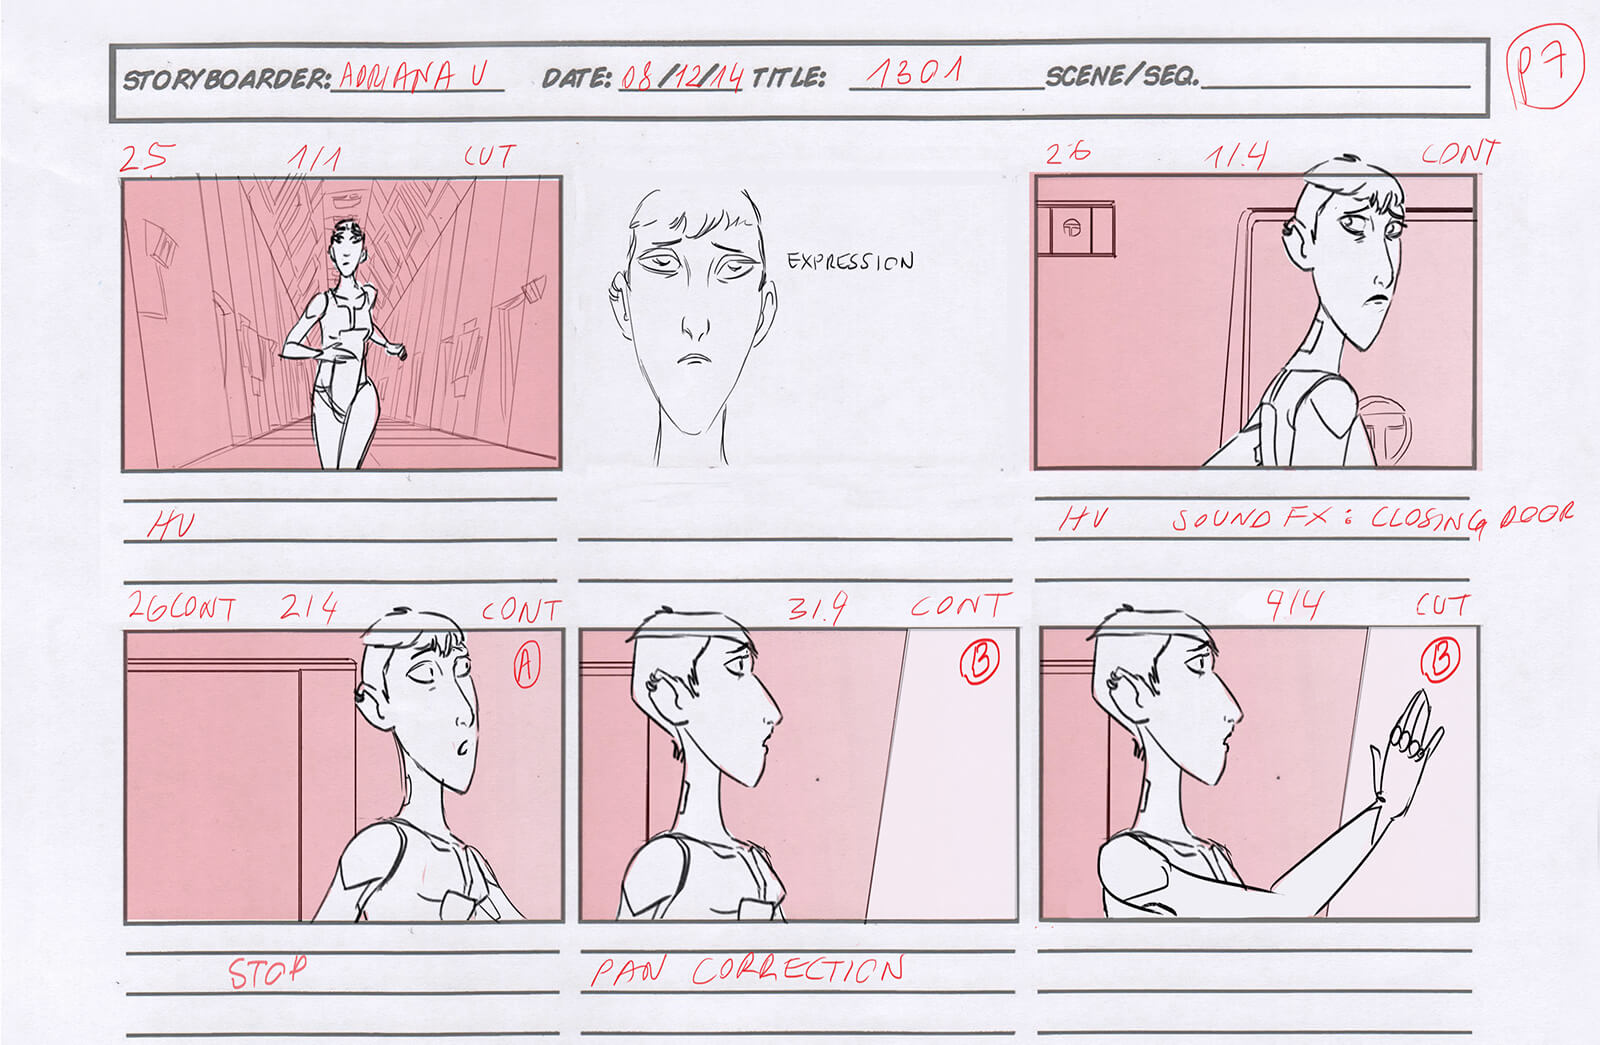 Red and white sketched storyboard for the film REA depicting the action from the beginning of the story to the end